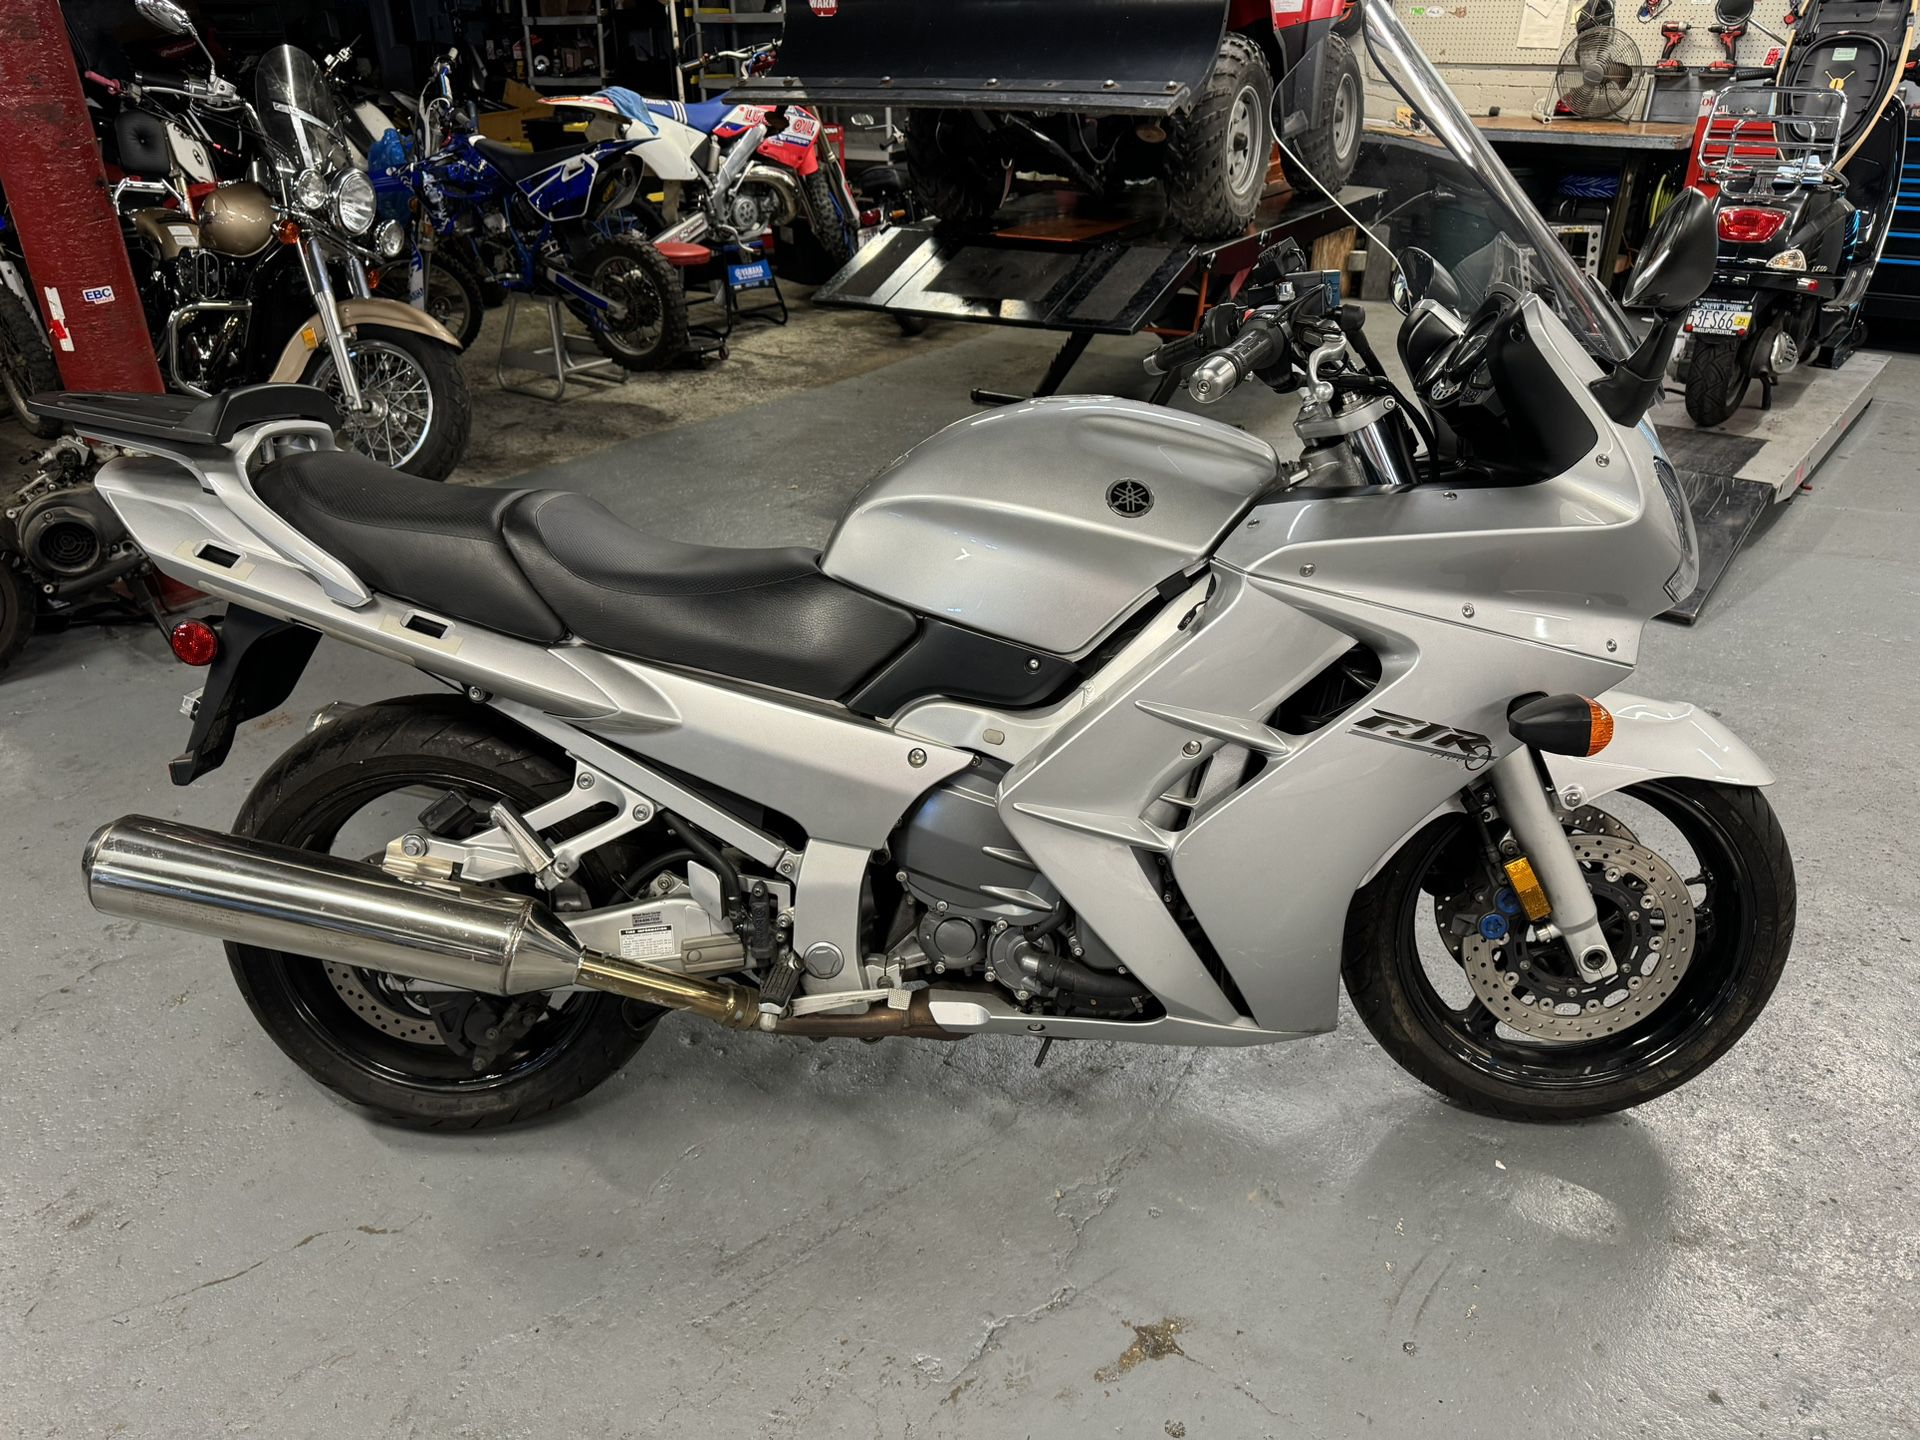 2003 Yamaha Fjr1300 One Owner, Very Clean, 3 Bags